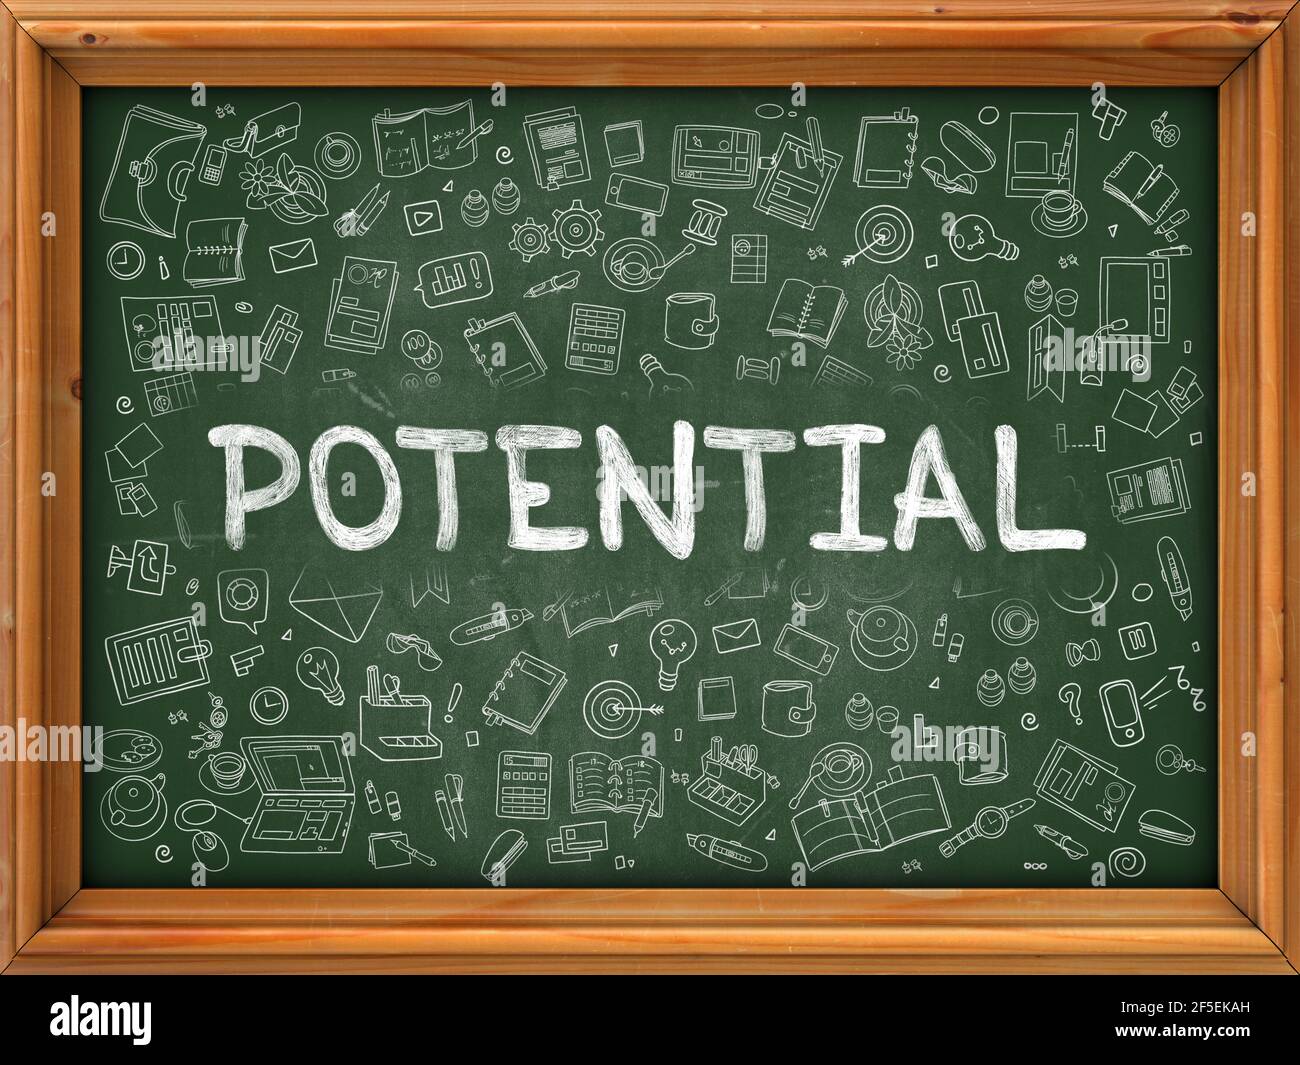 Potential - Hand Drawn on Green Chalkboard with Doodle Icons Around. Modern Illustration with Doodle Design Style. Stock Photo